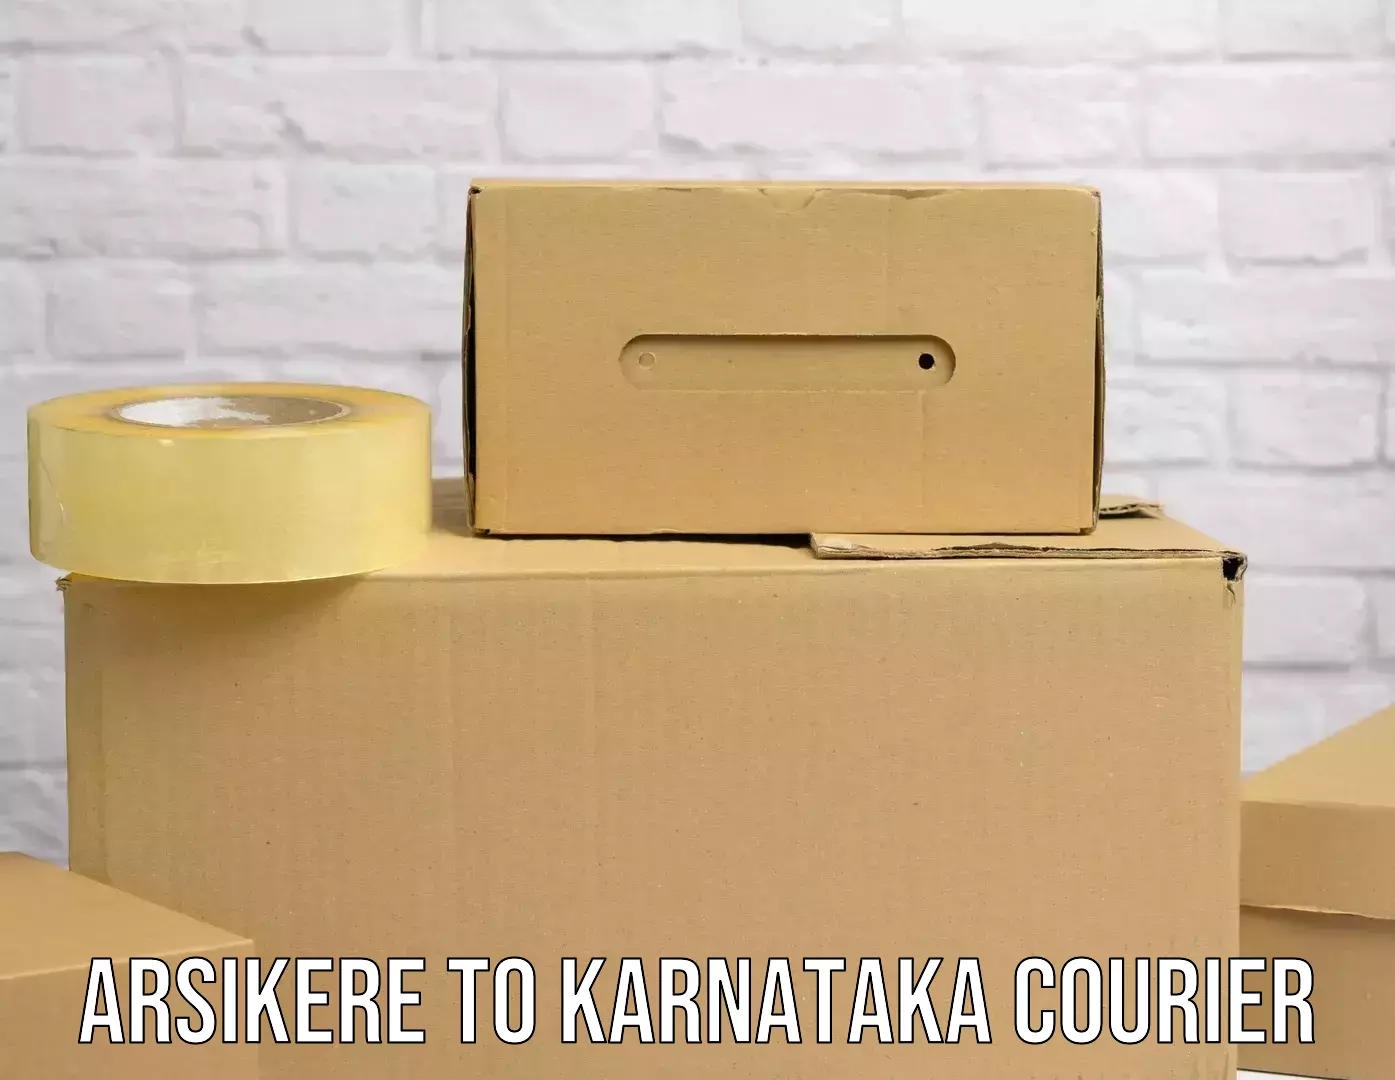 Versatile courier offerings Arsikere to Bangalore